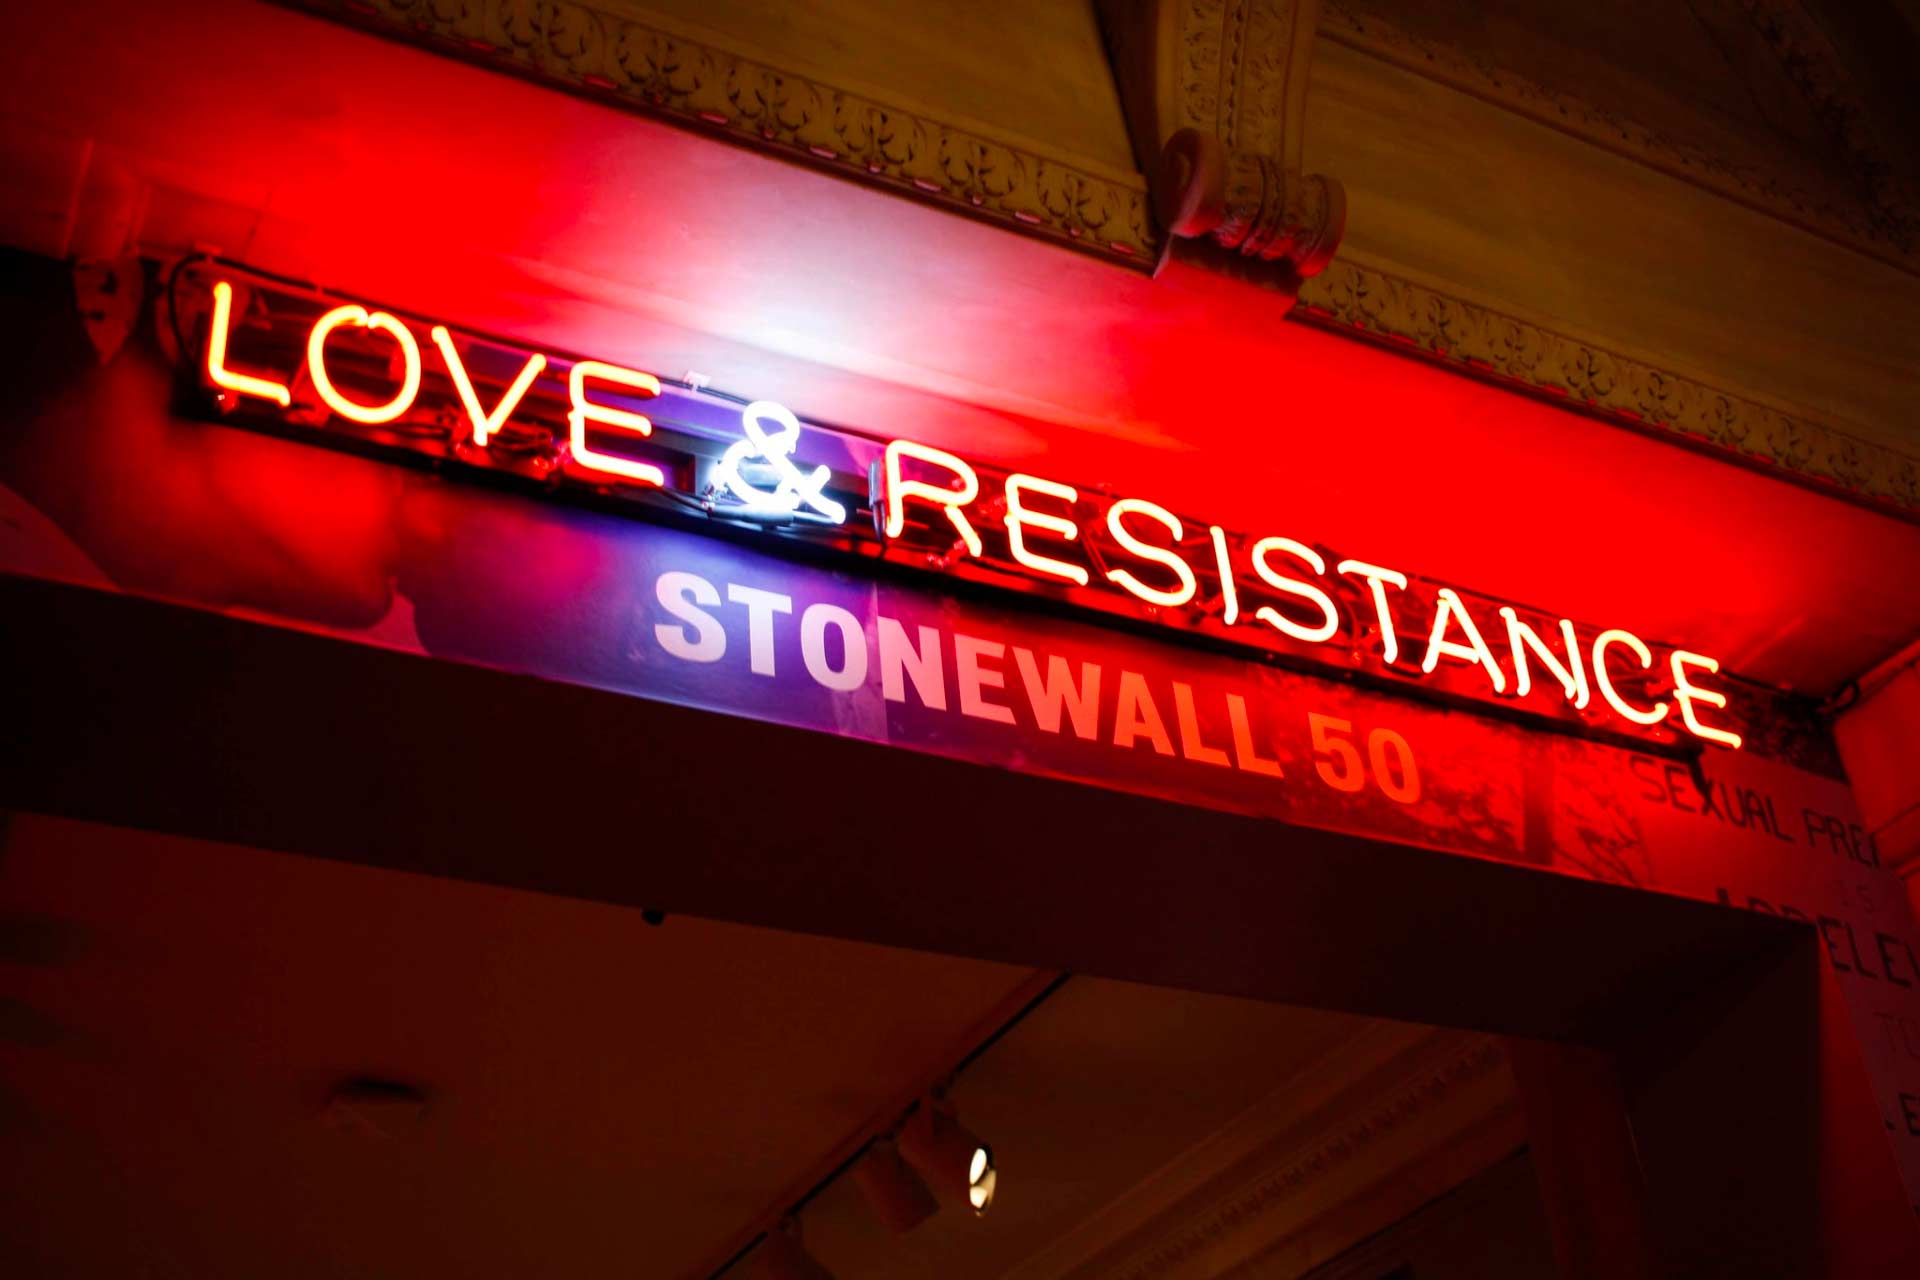 Neon sign outside of the historic Stonewall Inn that says, “Love & Resistance, Stonewall 50.” LGBTQ+ people of color played a pivotal role in the Stonewall uprising.